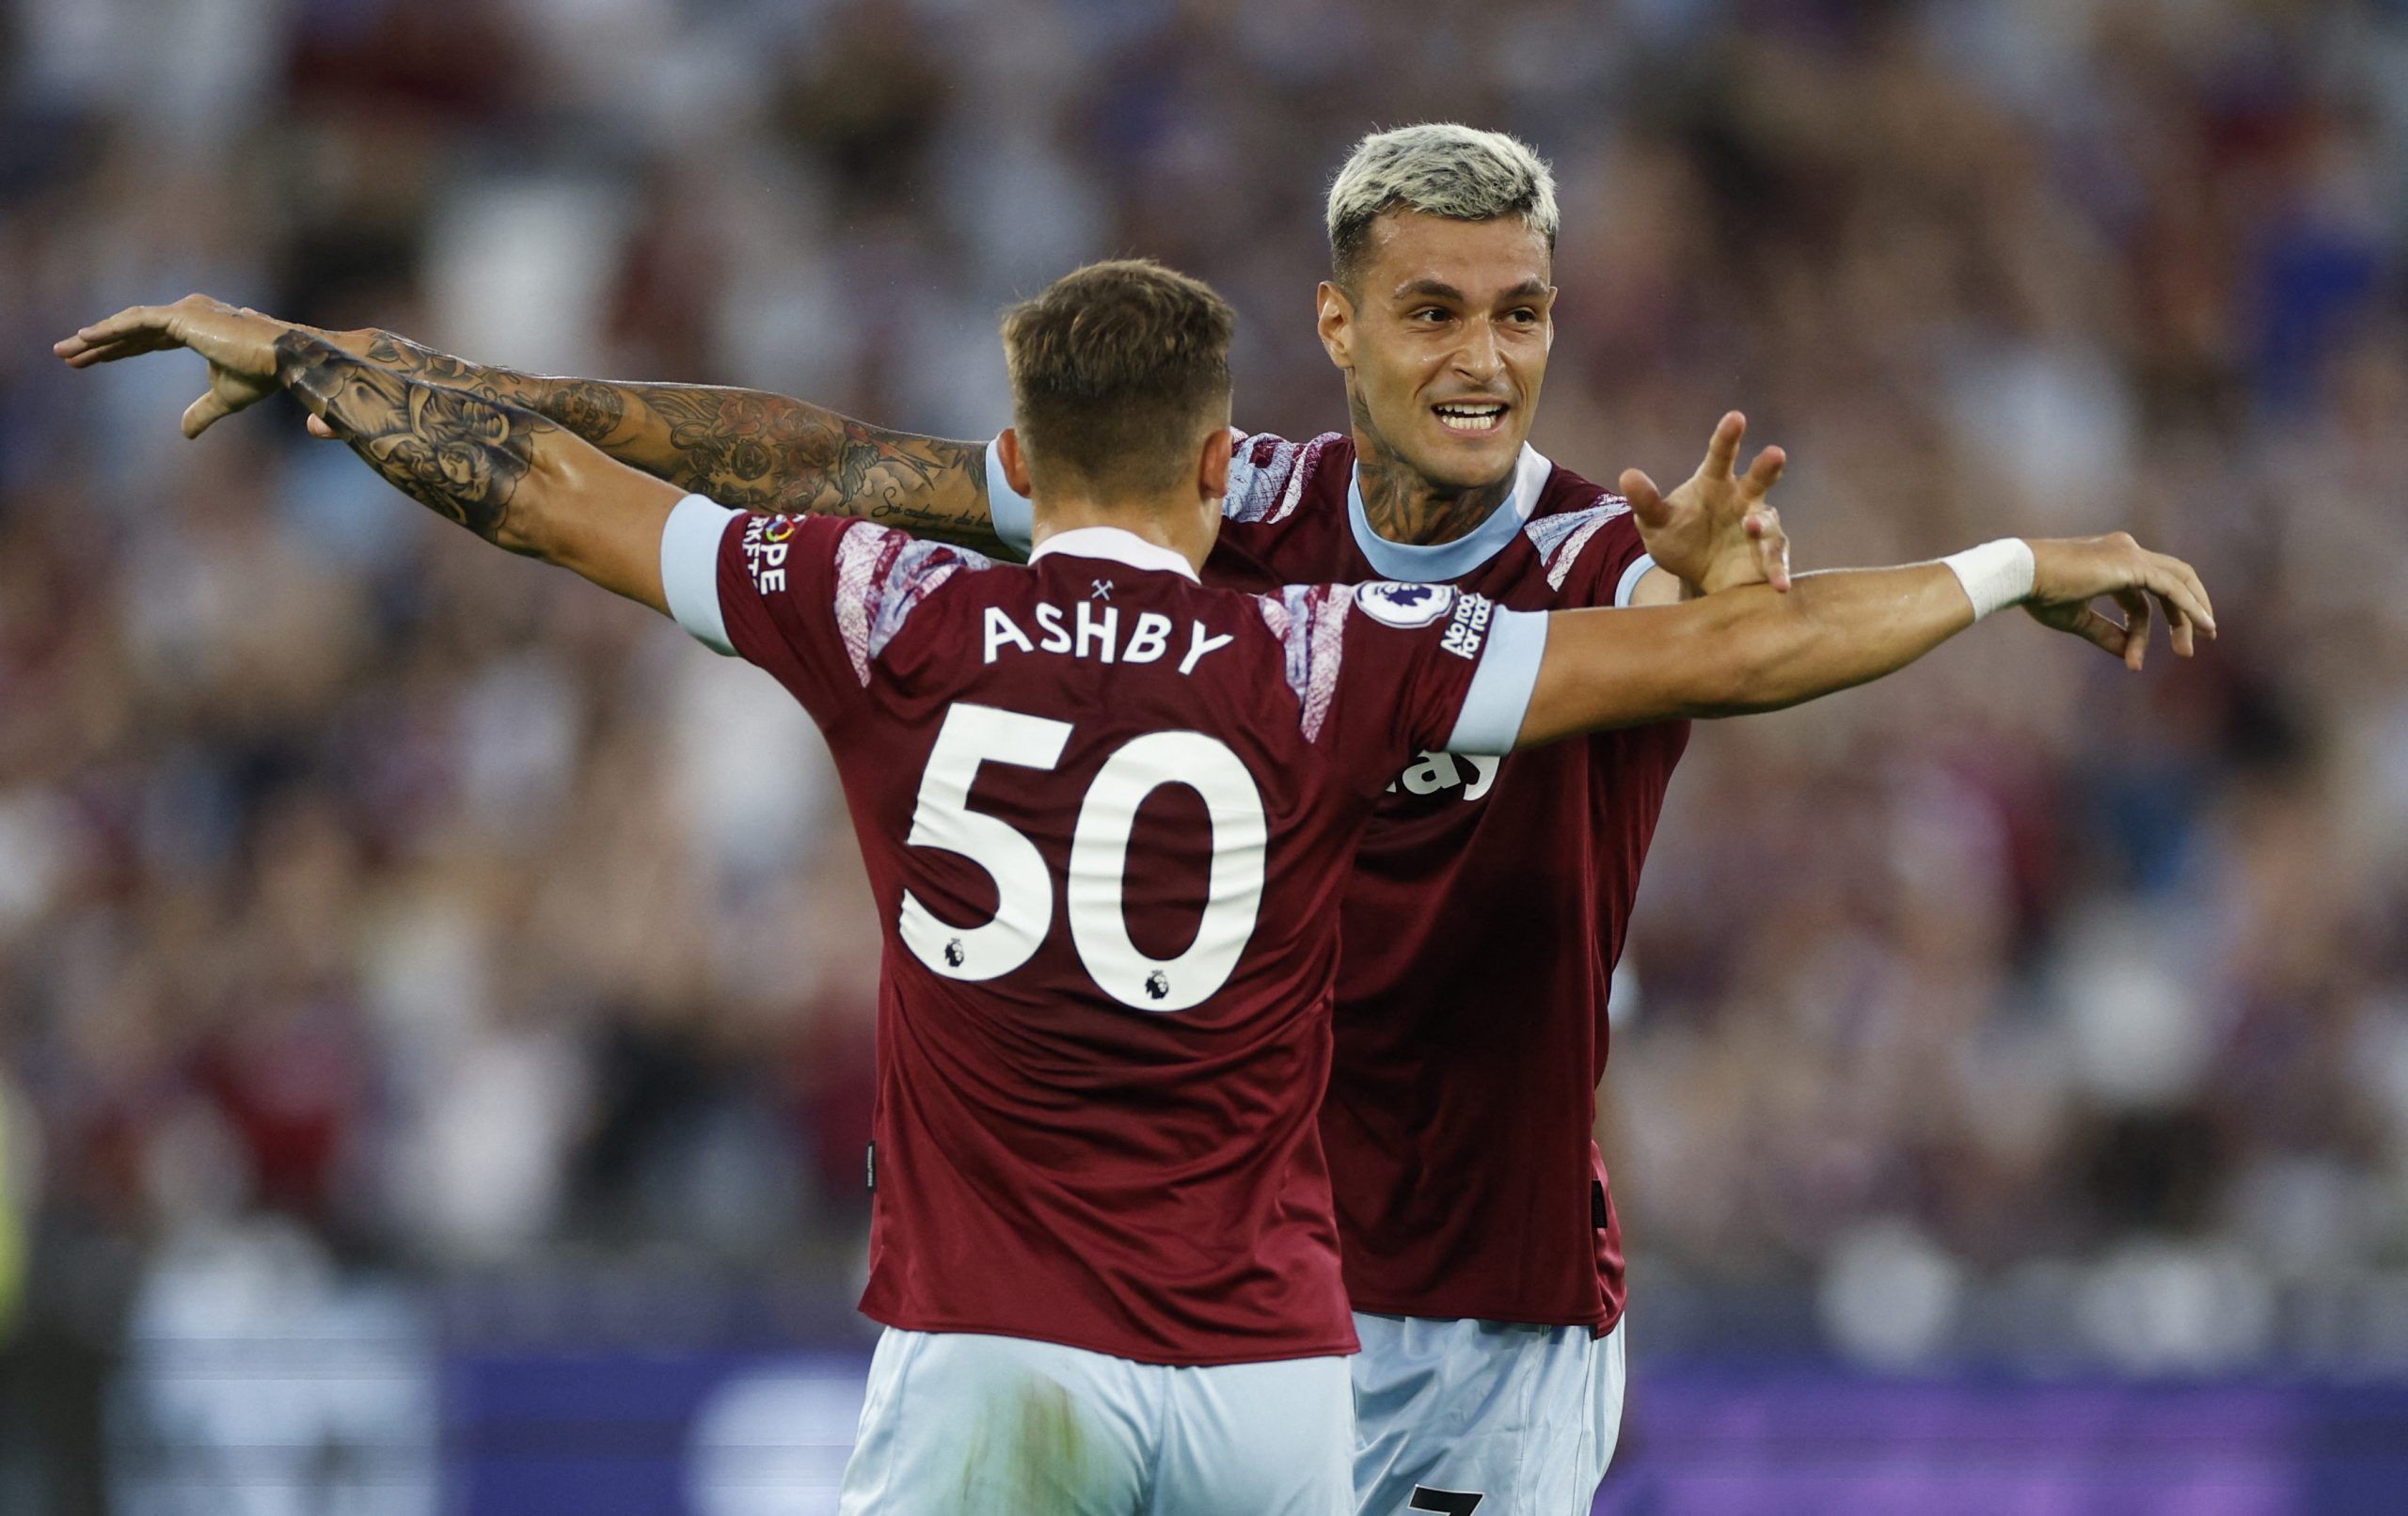 Soccer Football - Europa Conference League - Qualifying - Play off First Leg -  West Ham United v Viborg FF - London Stadium, London, Britain - August 18, 2022 West Ham United's Gianluca Scamacca celebrates scoring their first goal with Harrison Ashby Action Images via Reuters/John Sibley